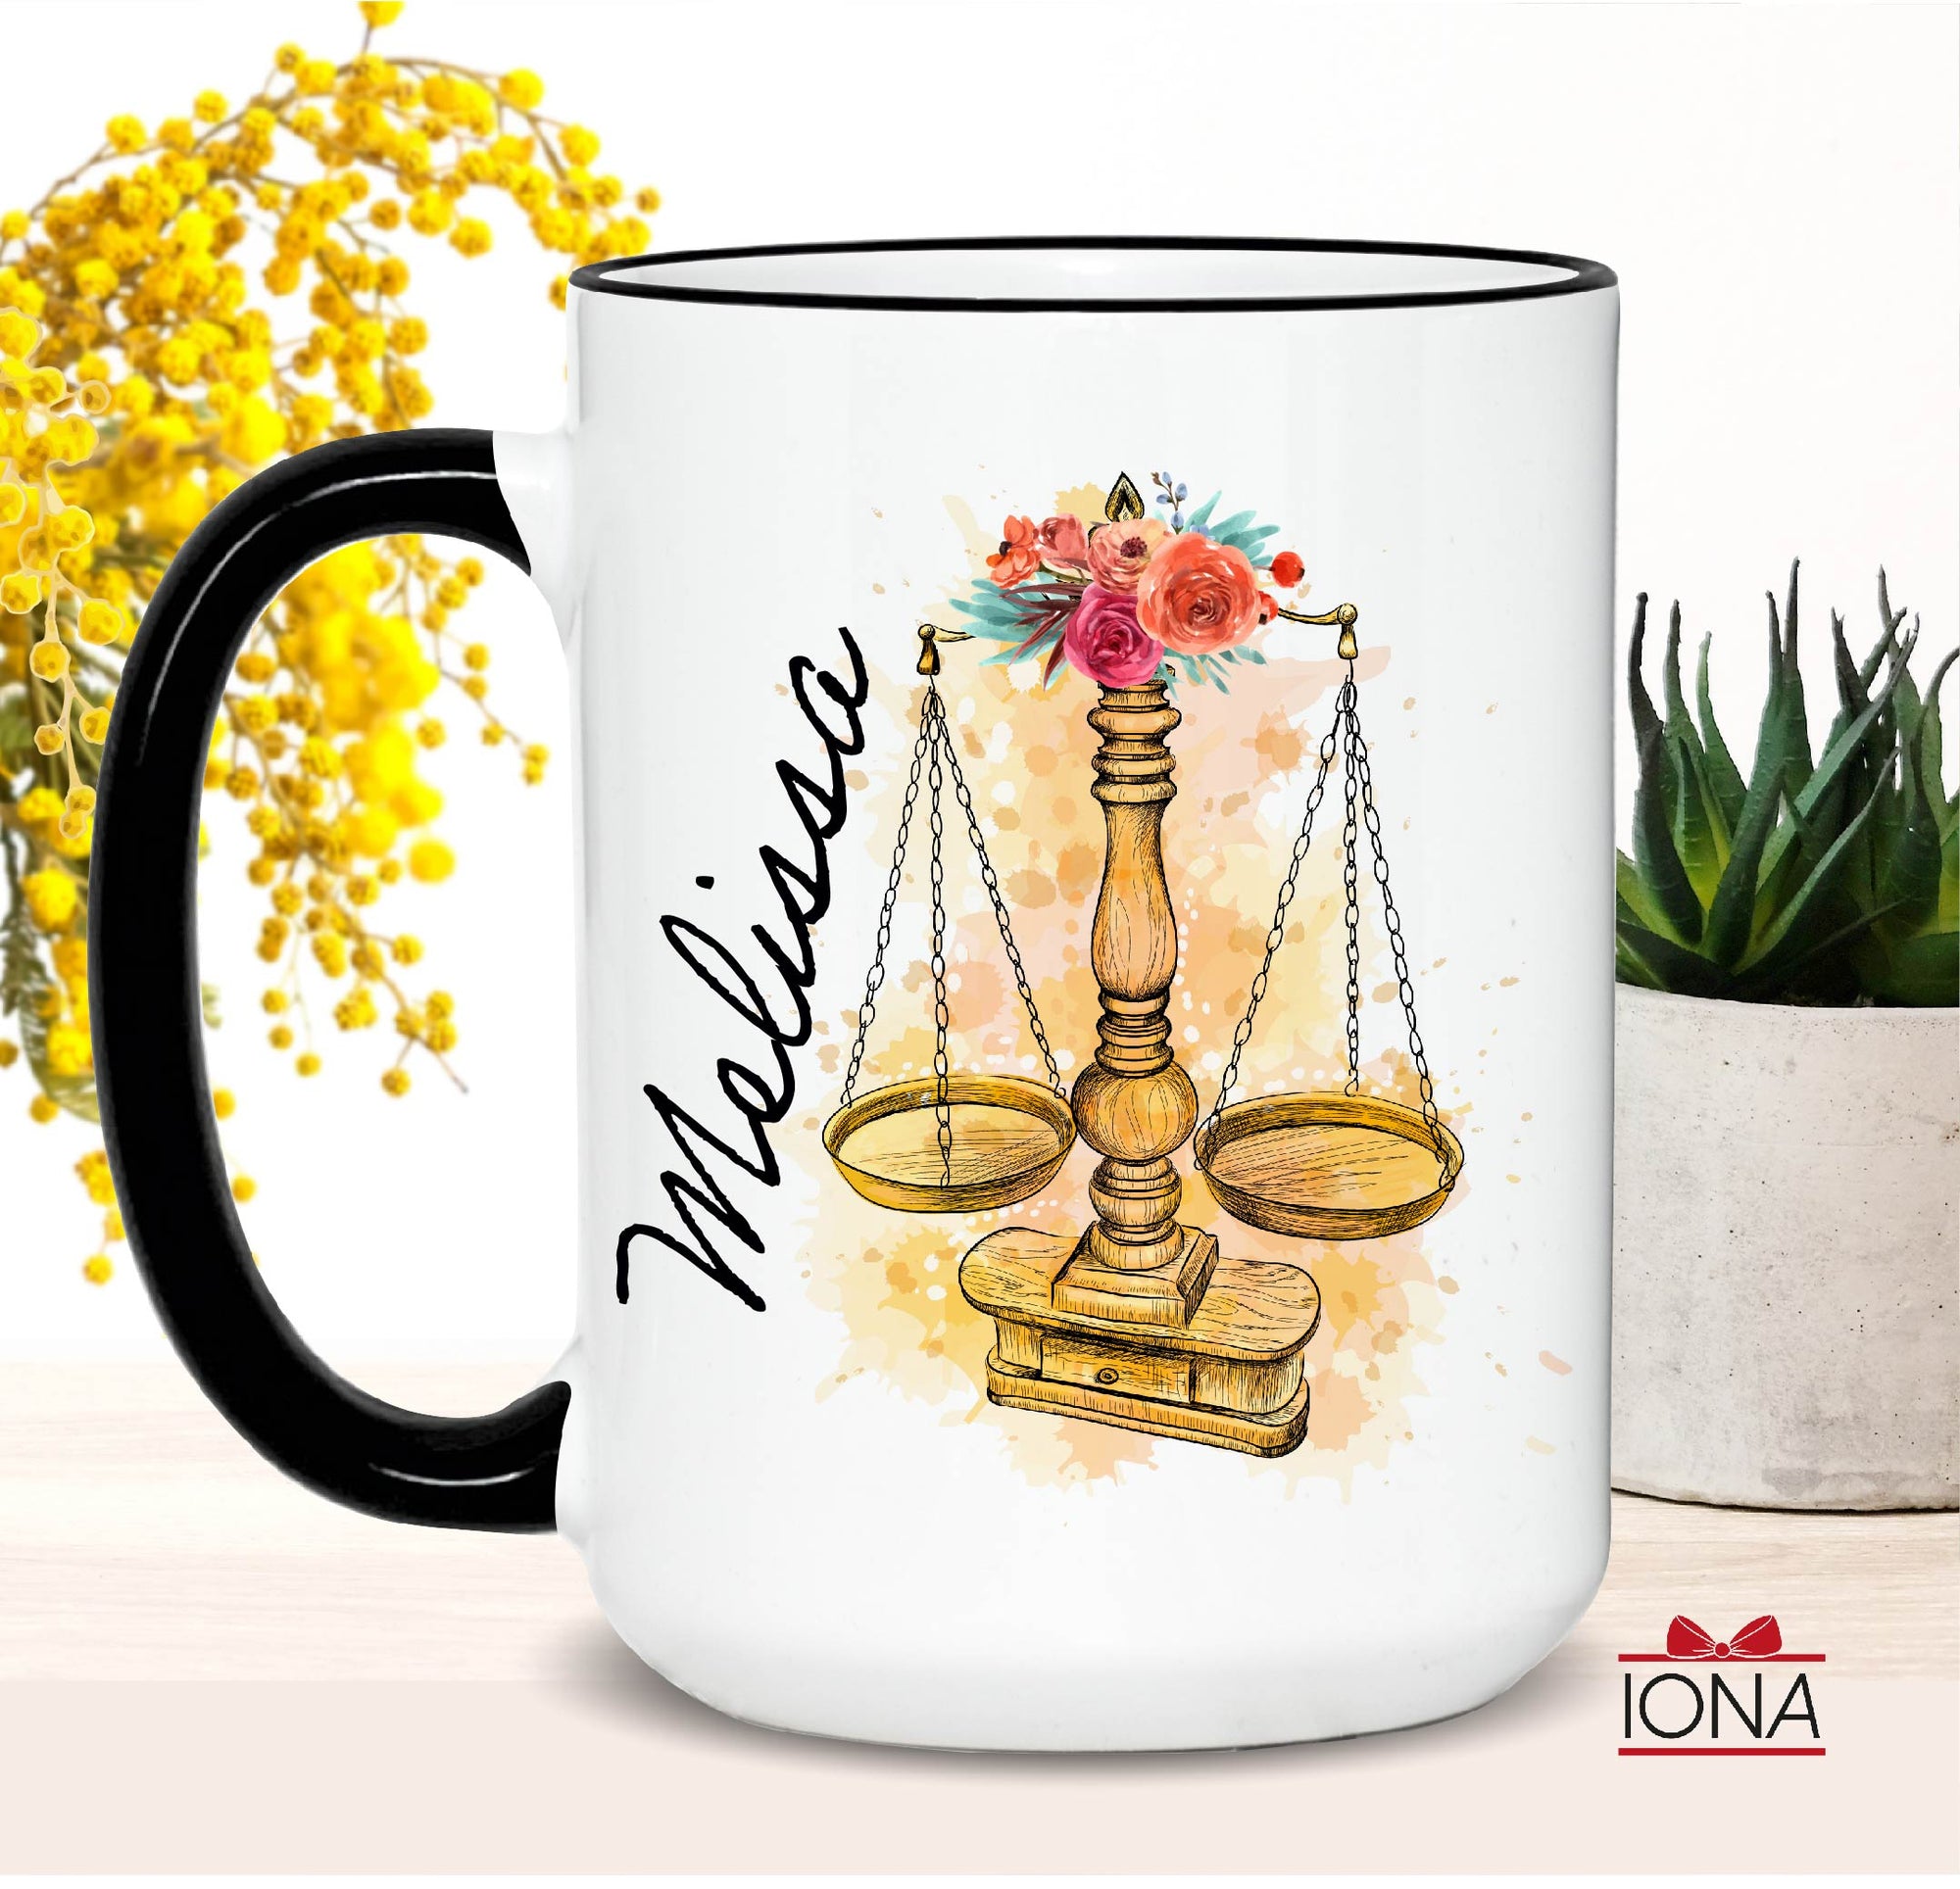 Personalized Lawyer Coffee Mug - Law School Student Graduation Gift, Attorney Paralegal Gift